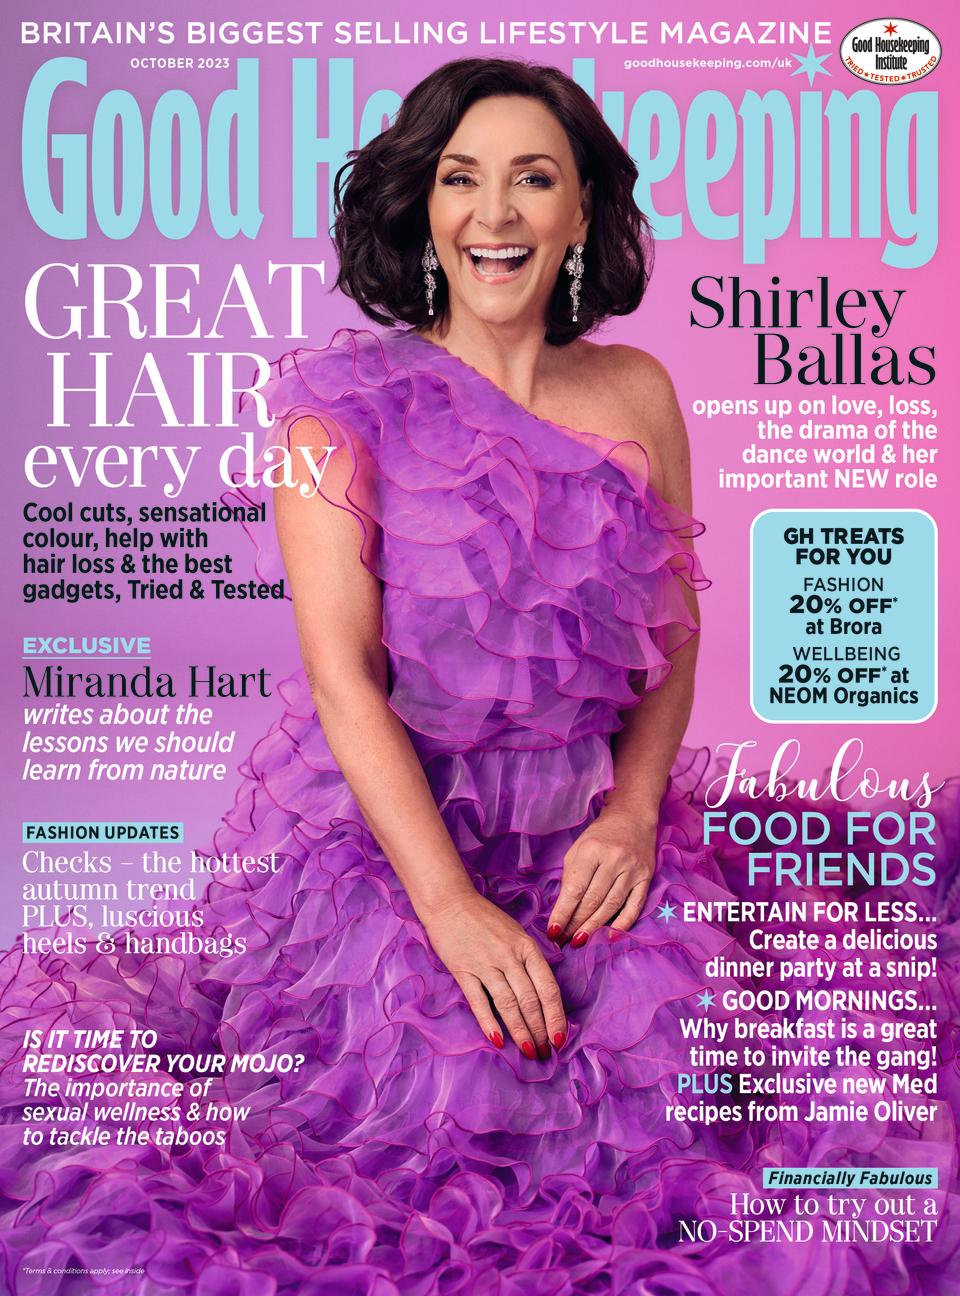 Shirley Balls appears on the cover of Good Housekeeping’s October issue(Good Housekeeping/David Venni/PA)